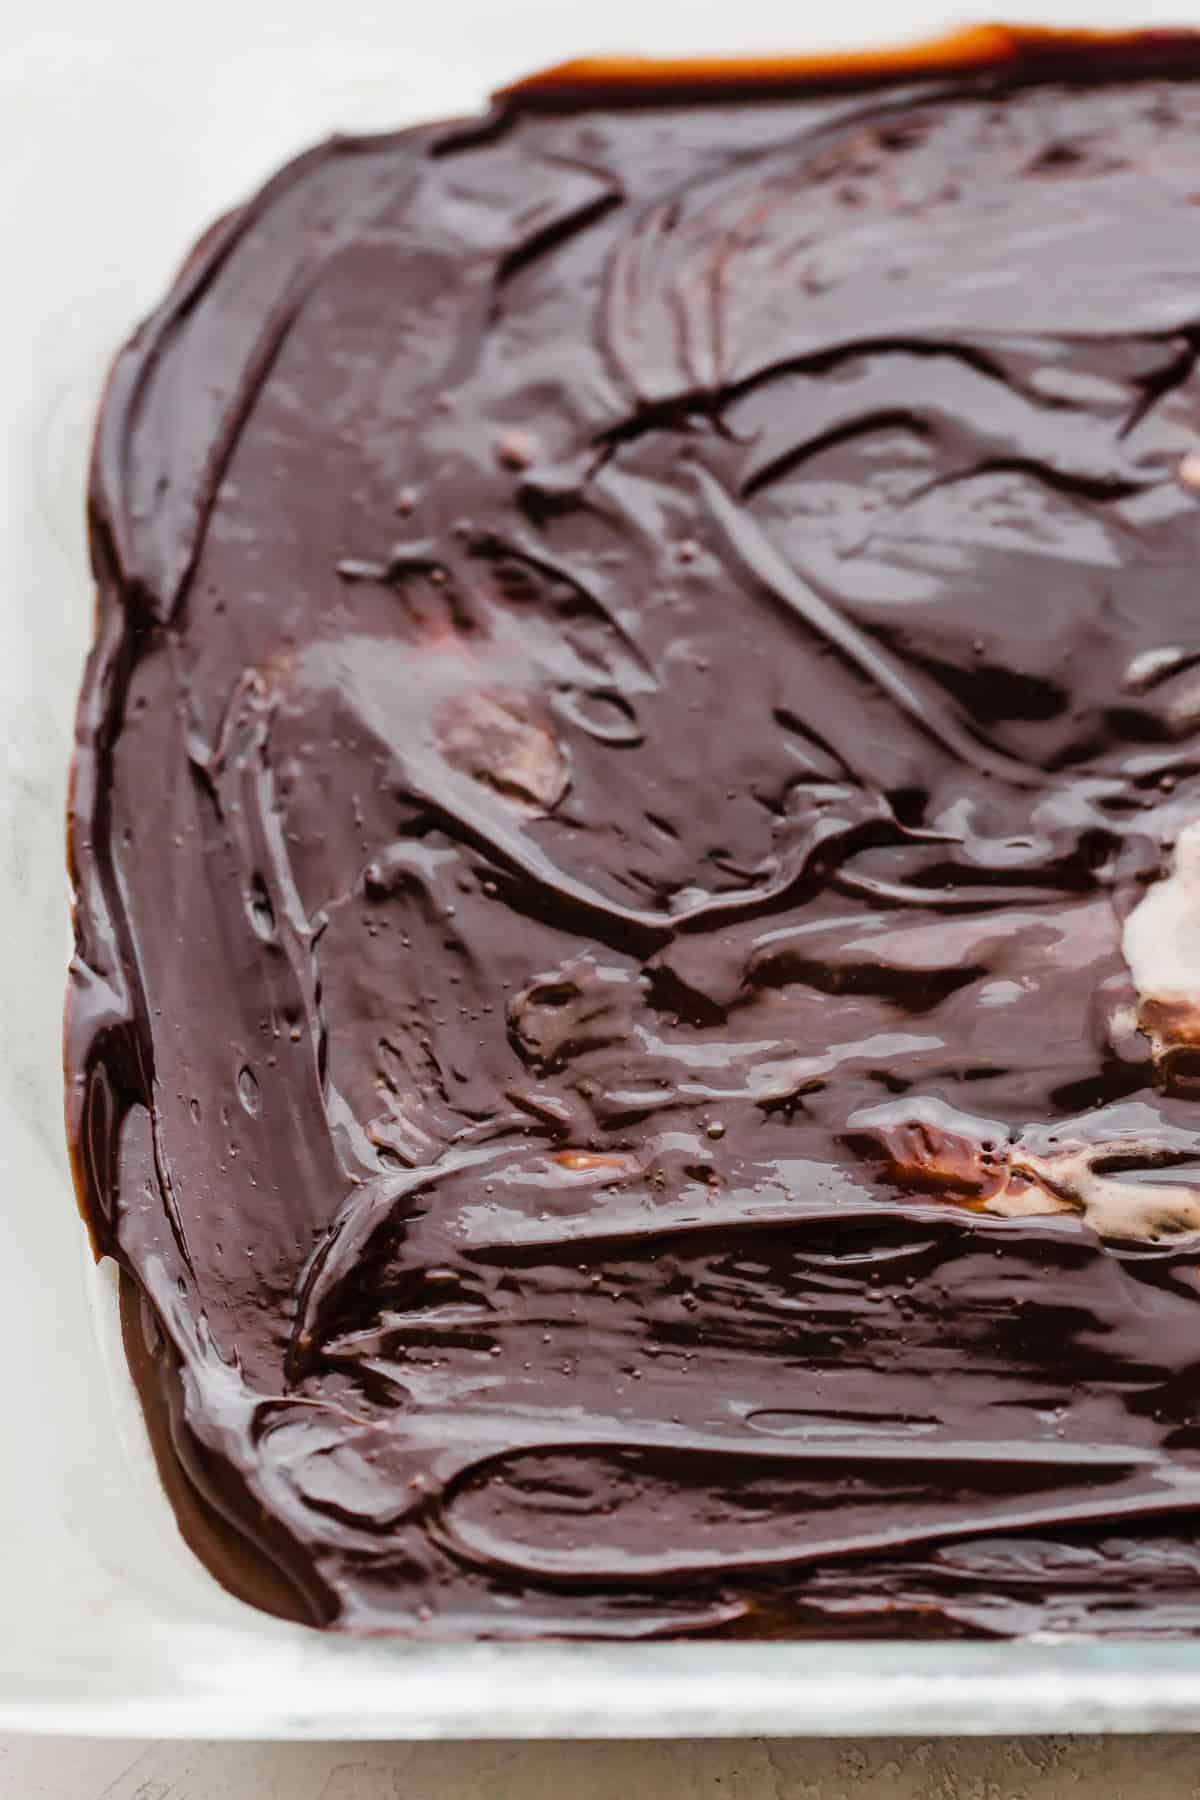 A close up photo of hot fudge overtop Oreo ice cream that has been spread into a baking dish, for making Oreo Ice Cream Cake.